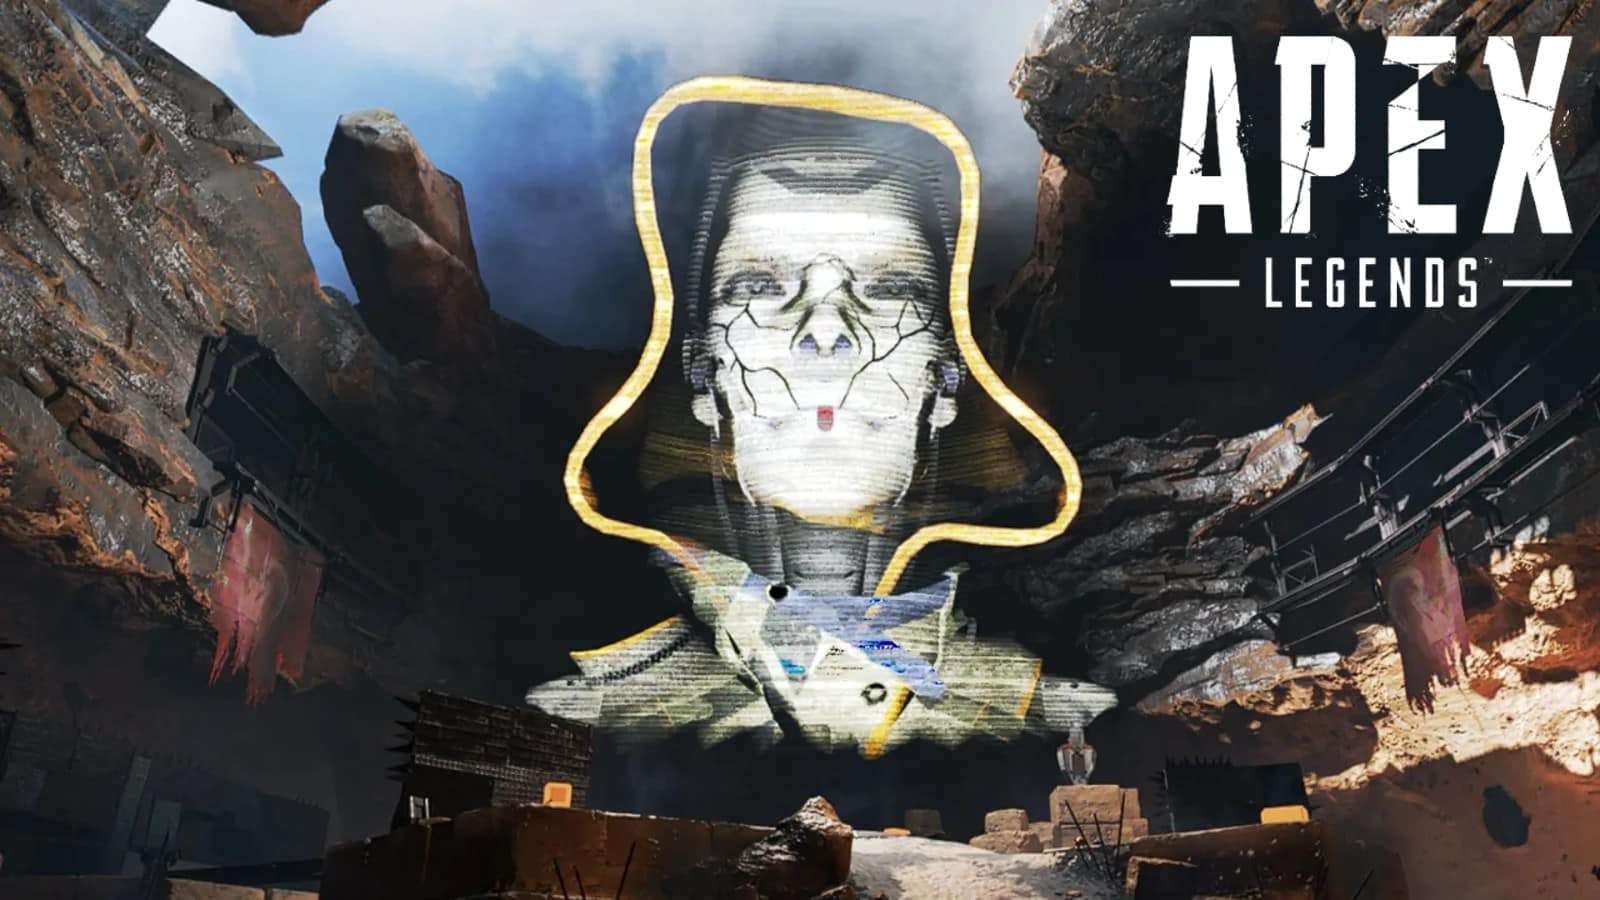 Ash's face in holographic form with Apex Legends logo next to her